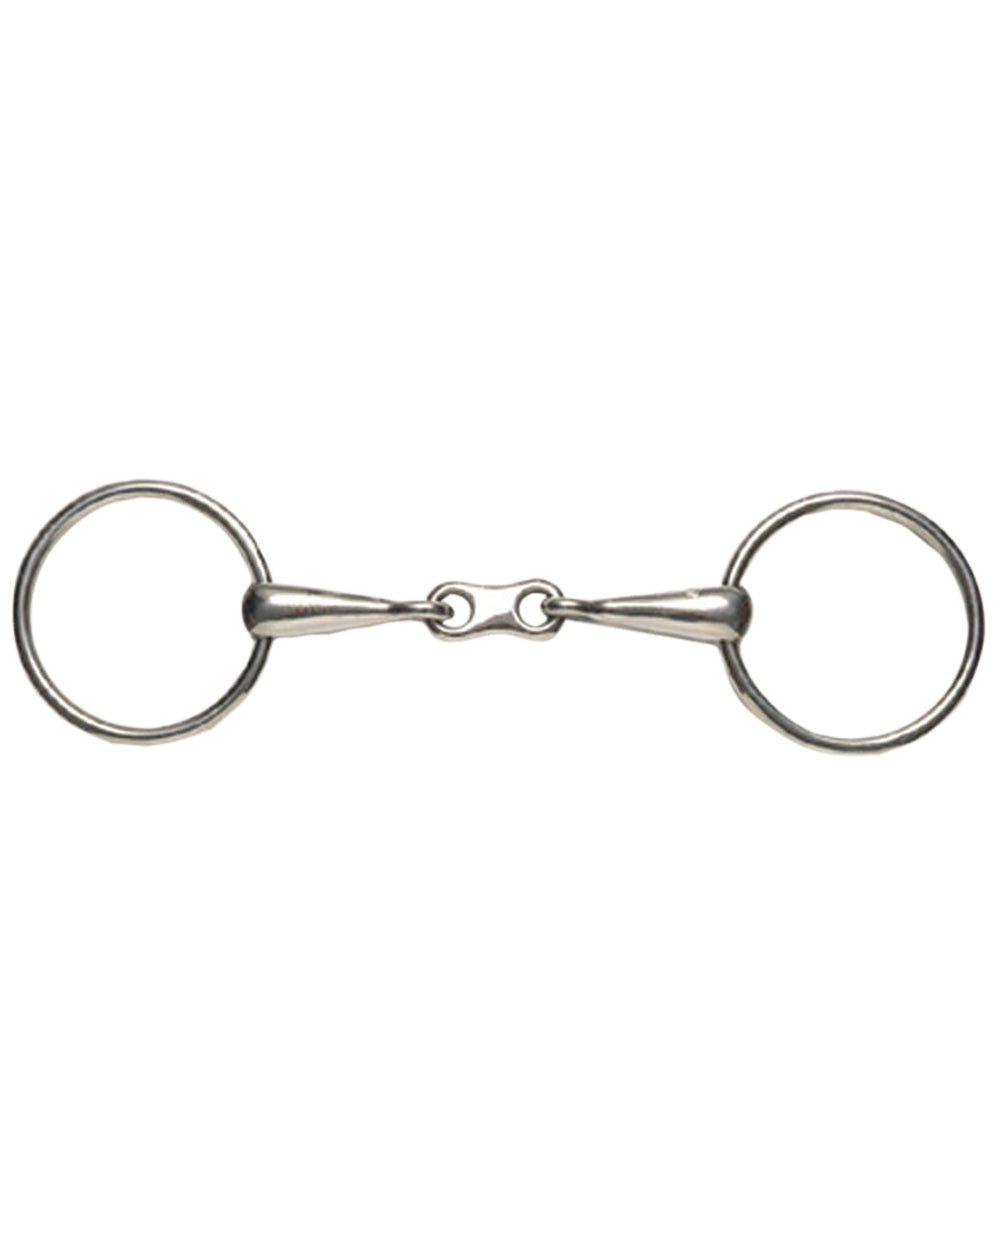 Korsteel Stainless Steel Thin Mouth French Link Loose Ring Snaffle Bit on white background 